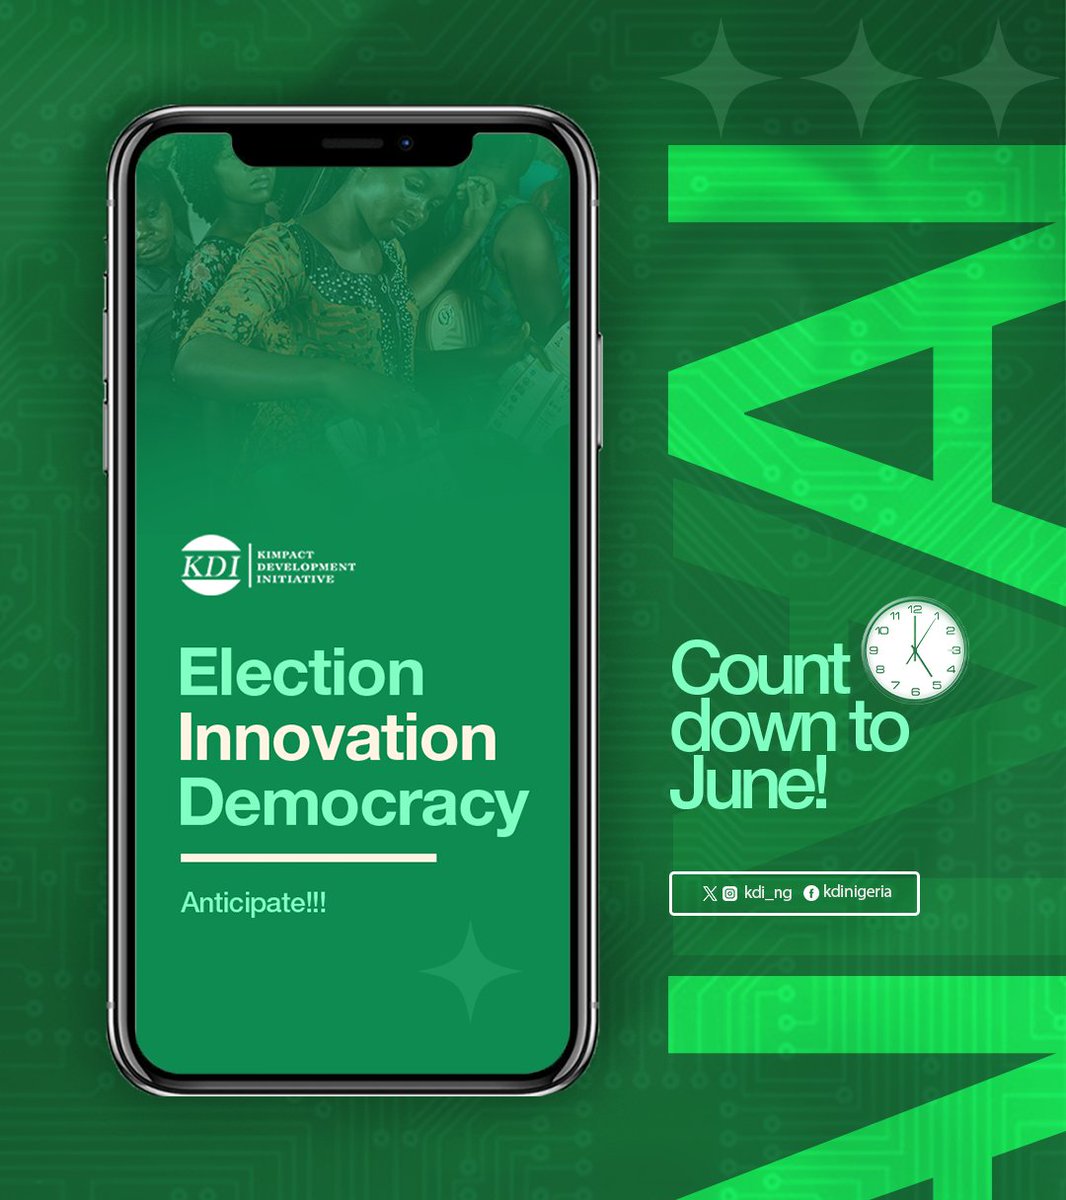 The key to unleashing your civic power just got innovative! Are you ready to be a part of this big innovation coming your way this June? Wait for it! #ElectionAI #CivicPower